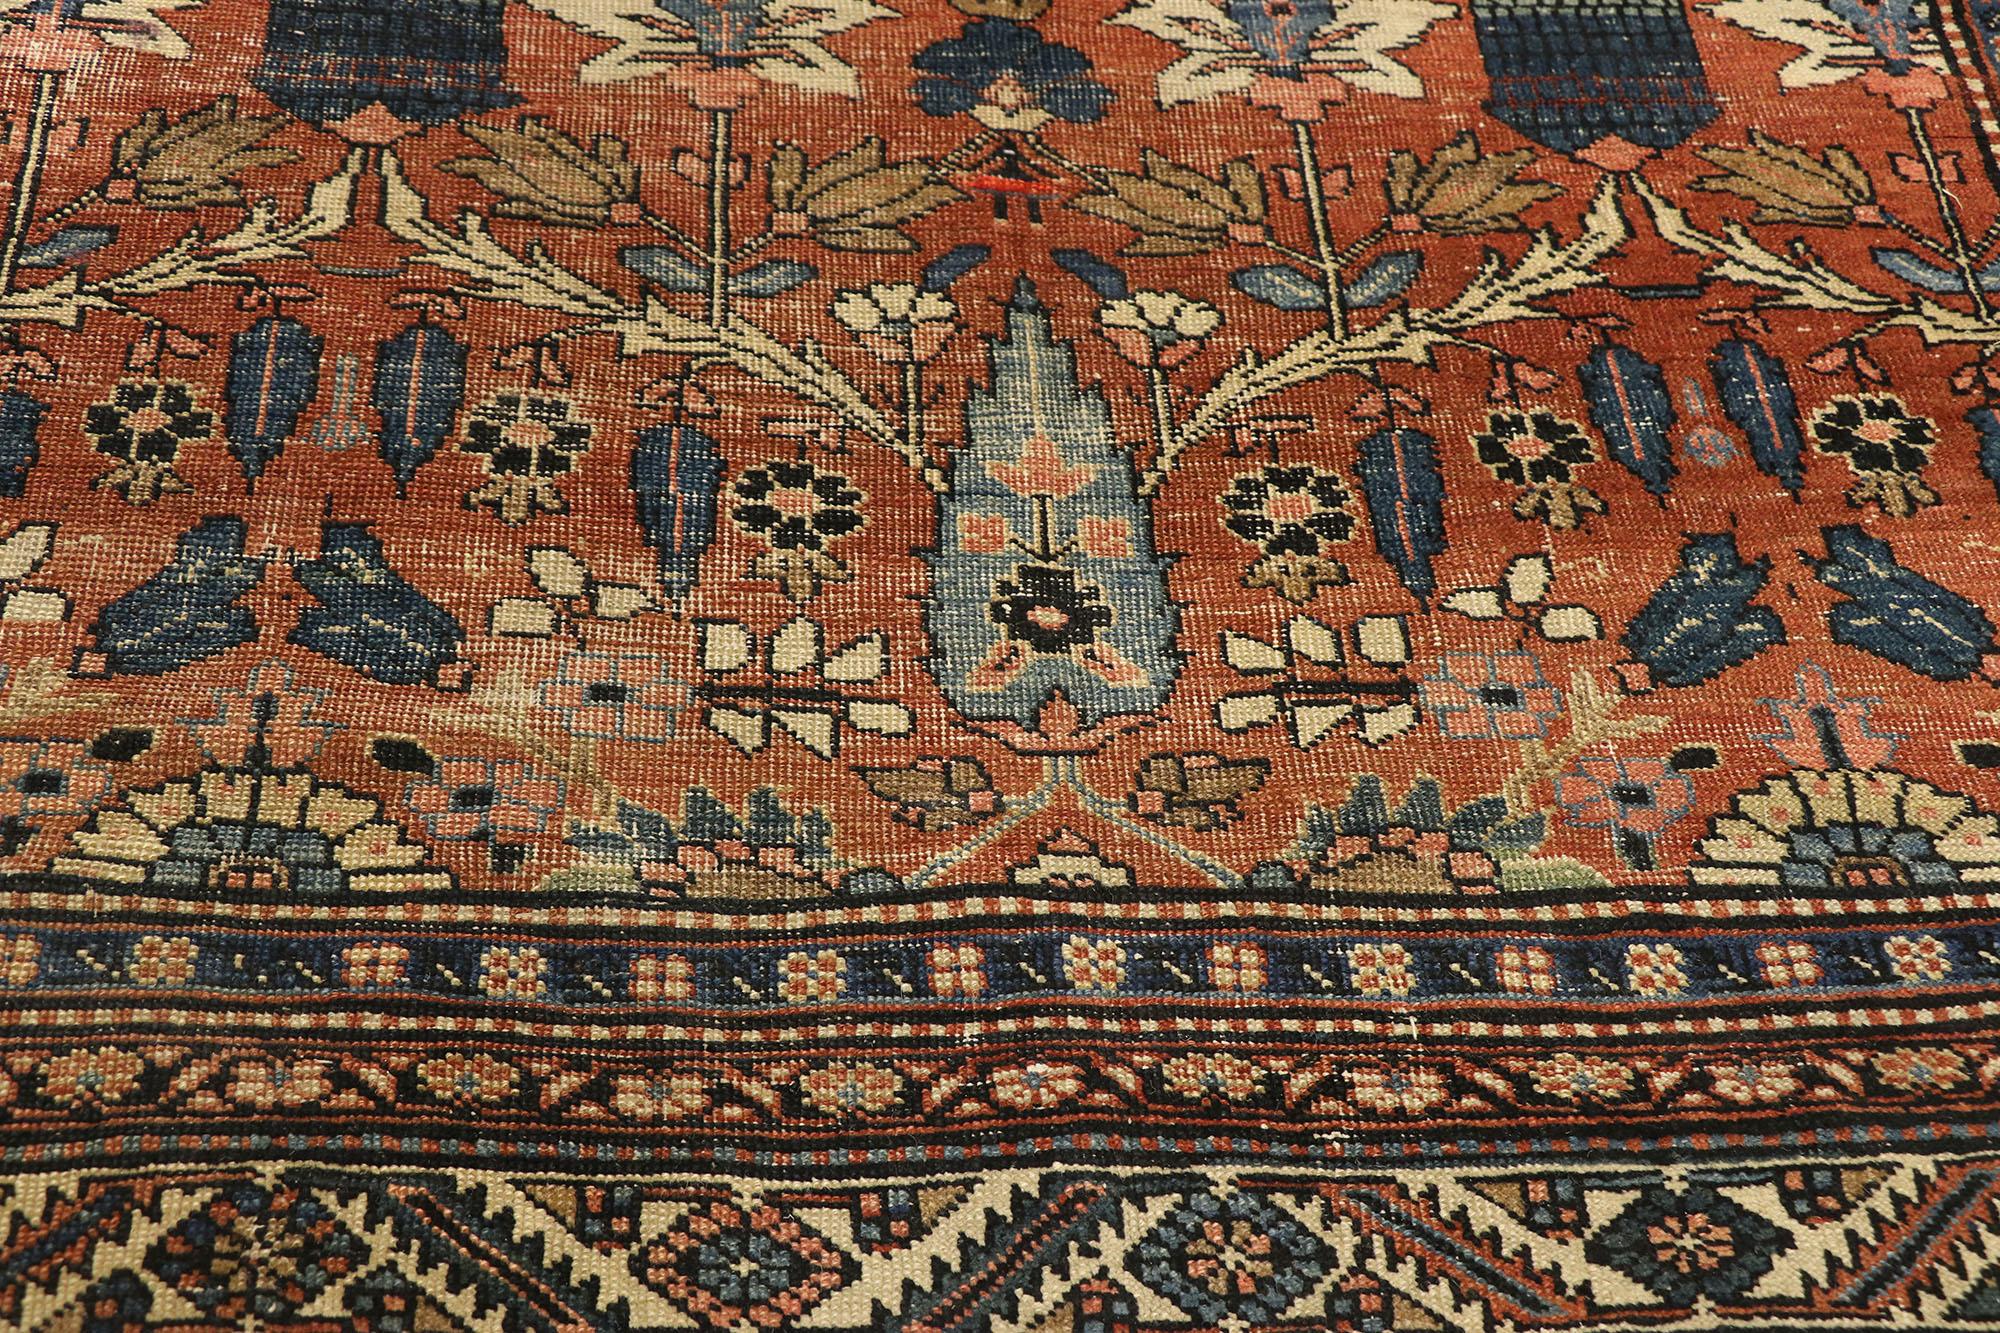 Late 19th Century Antique Persian Bakshaish Gallery Rug with Arts & Crafts Style In Distressed Condition For Sale In Dallas, TX